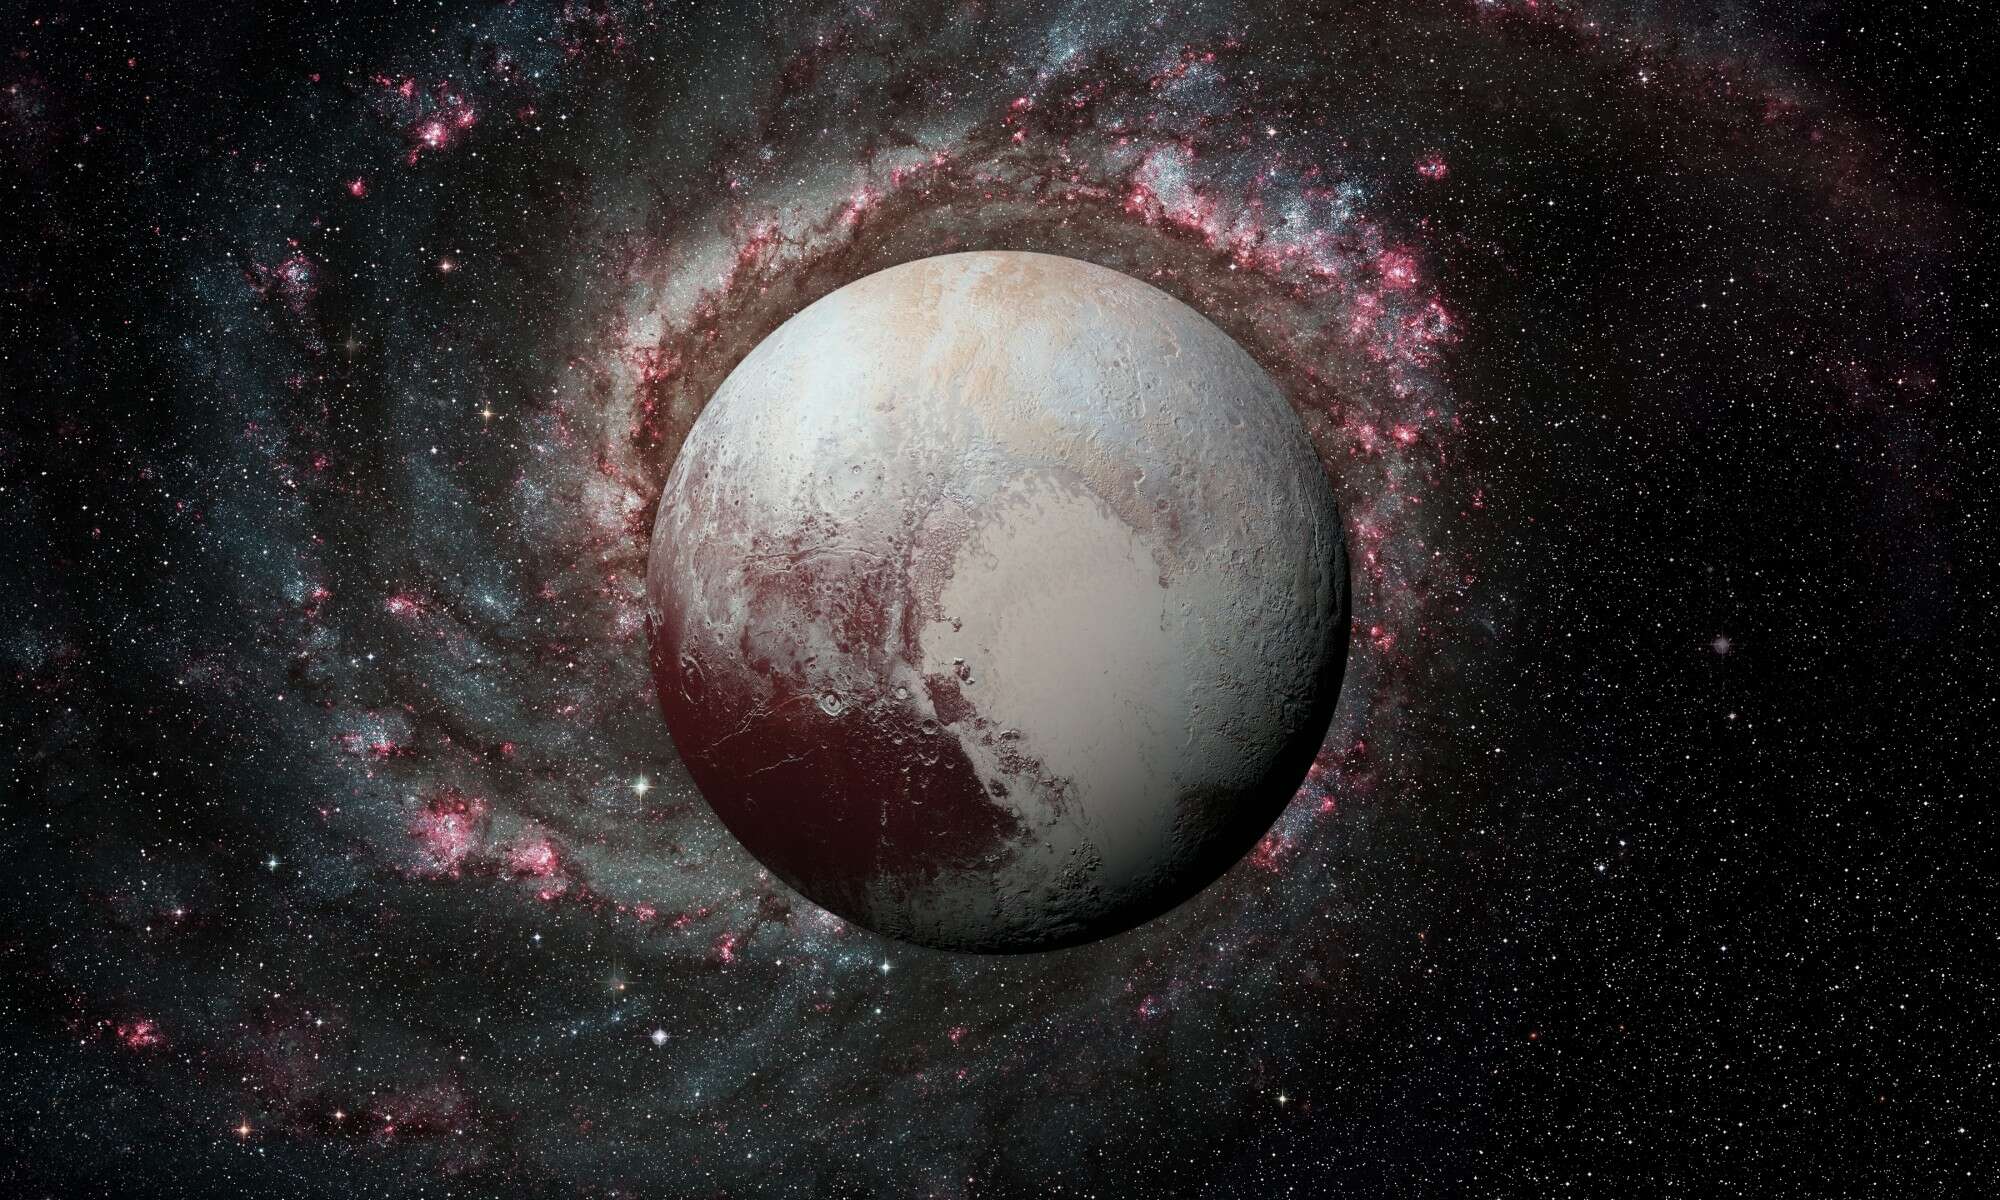 How Far Away is Pluto from Earth, The Sun, And Other Planets?